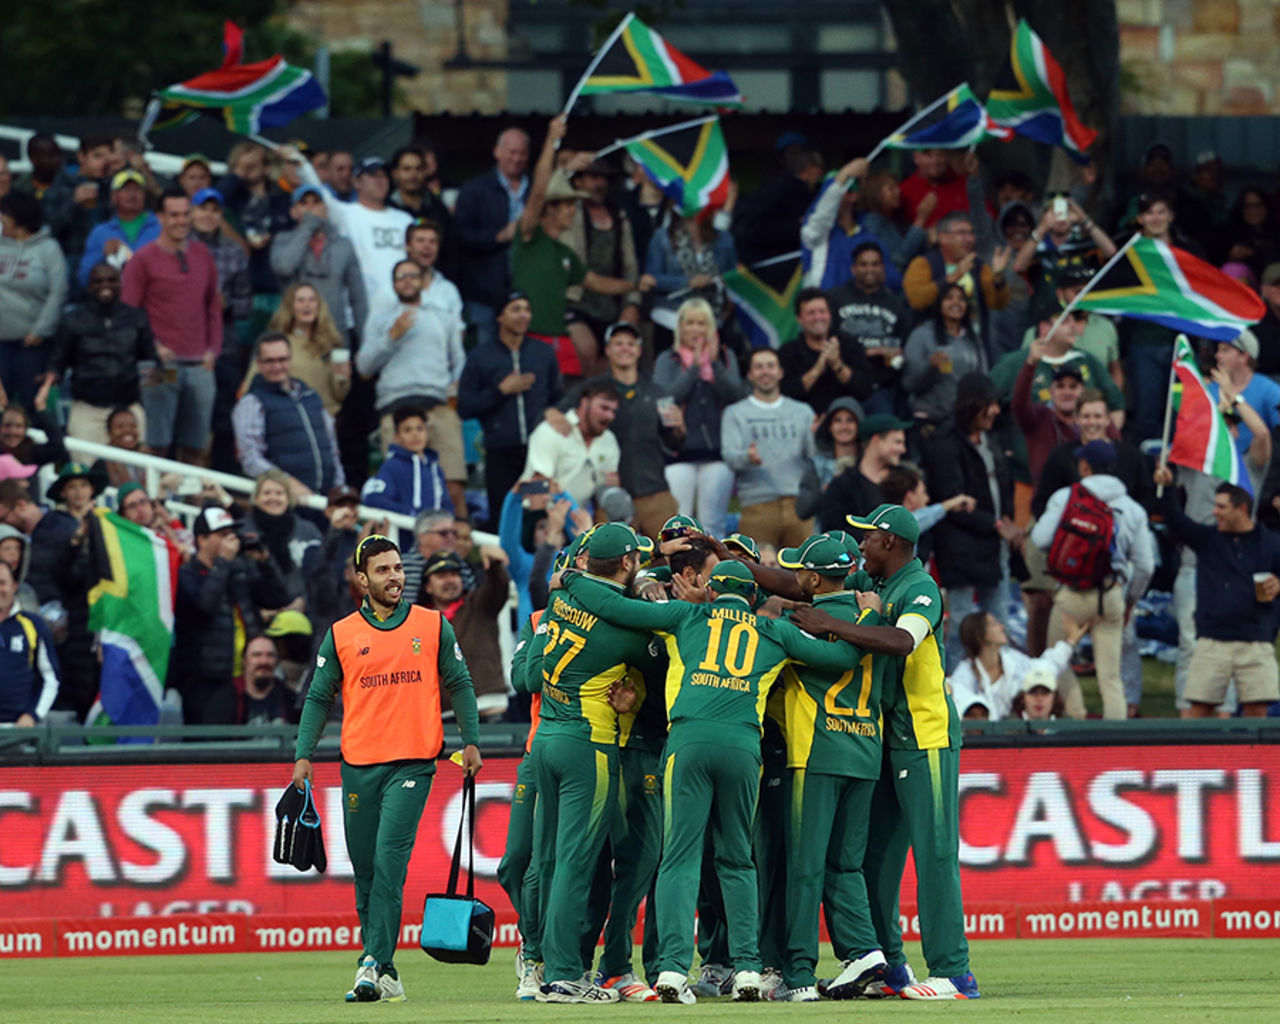 South Africa get into a huddle at the drinks break, South Africa v Australia, 5th ODI, Cape Town, October 12, 2016